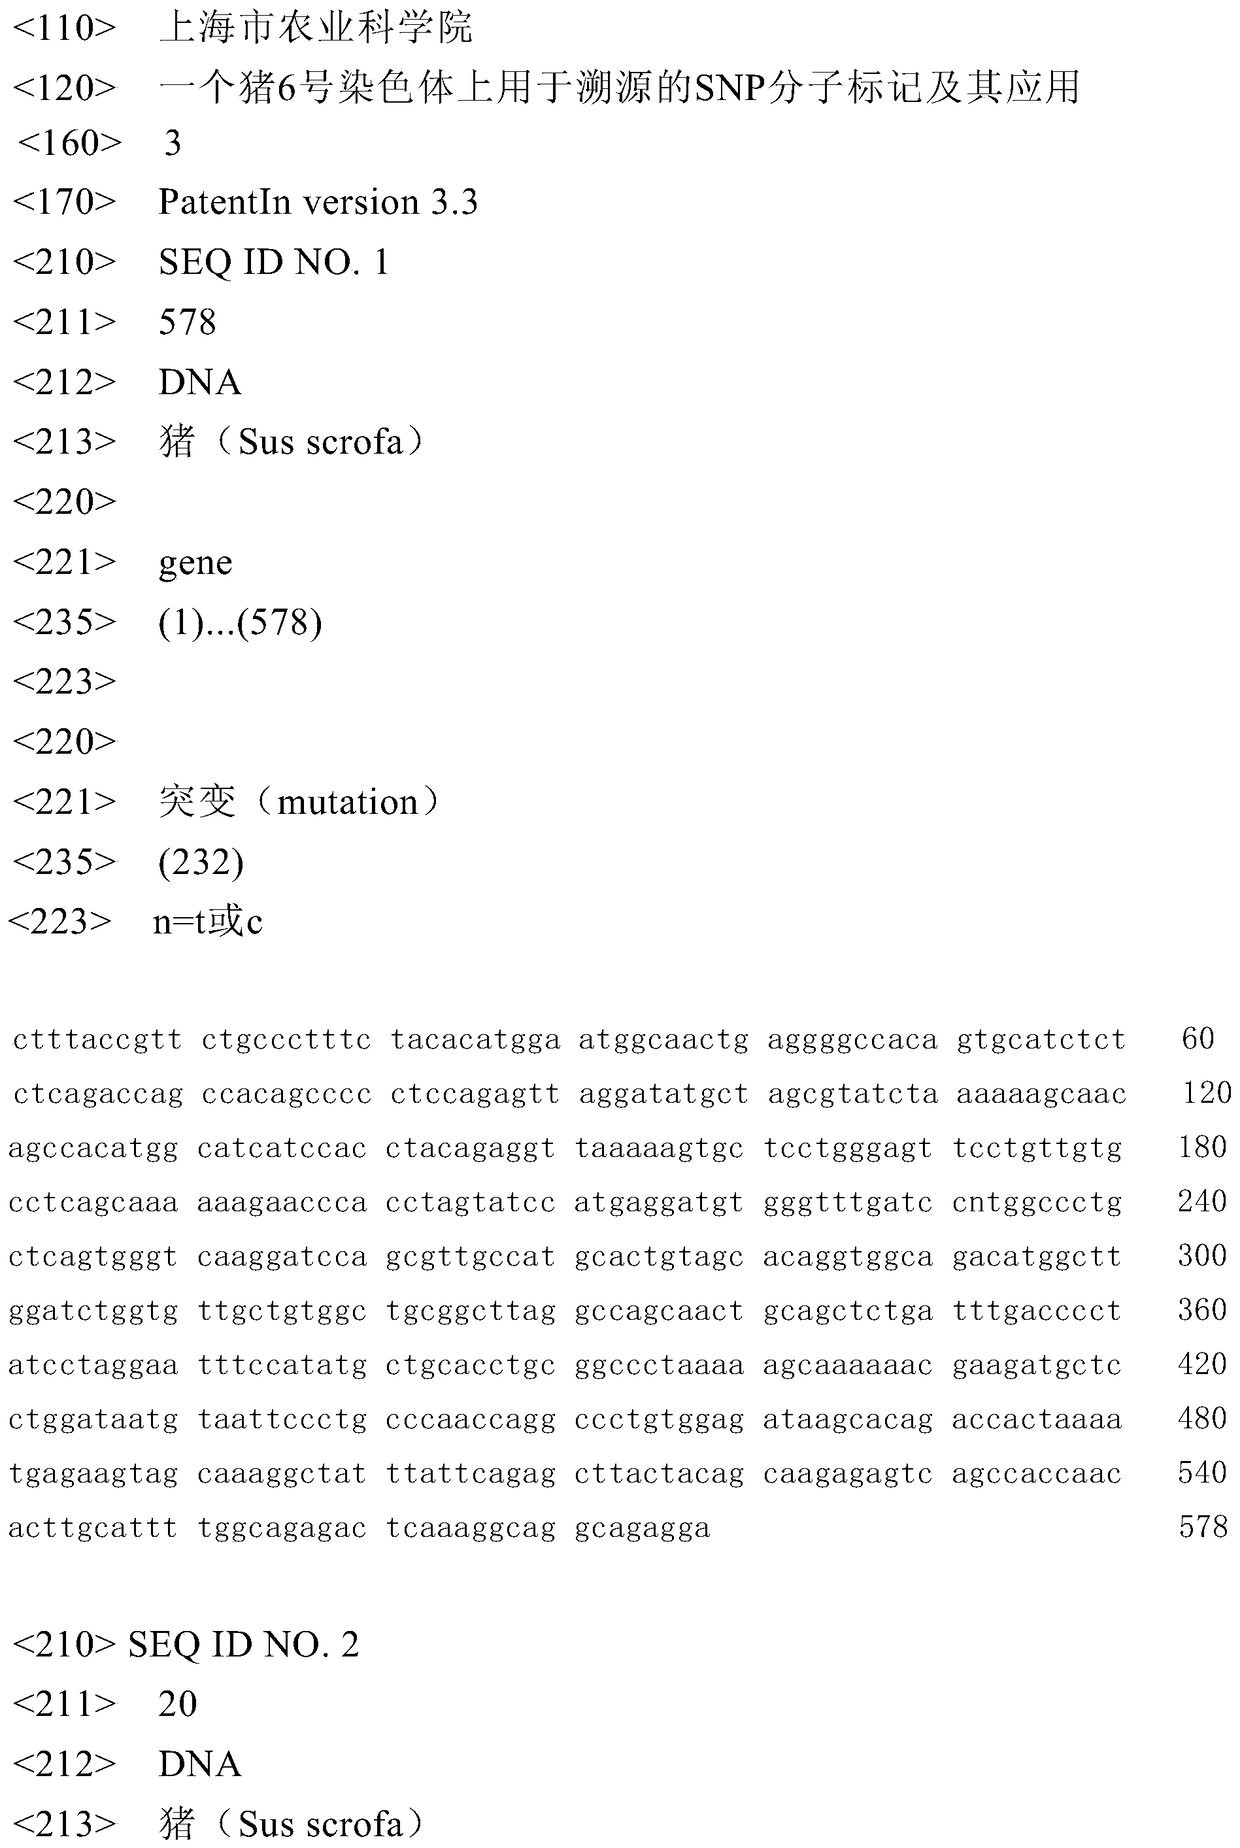 A SNP molecular marker for traceability on pig chromosome 6 and its application